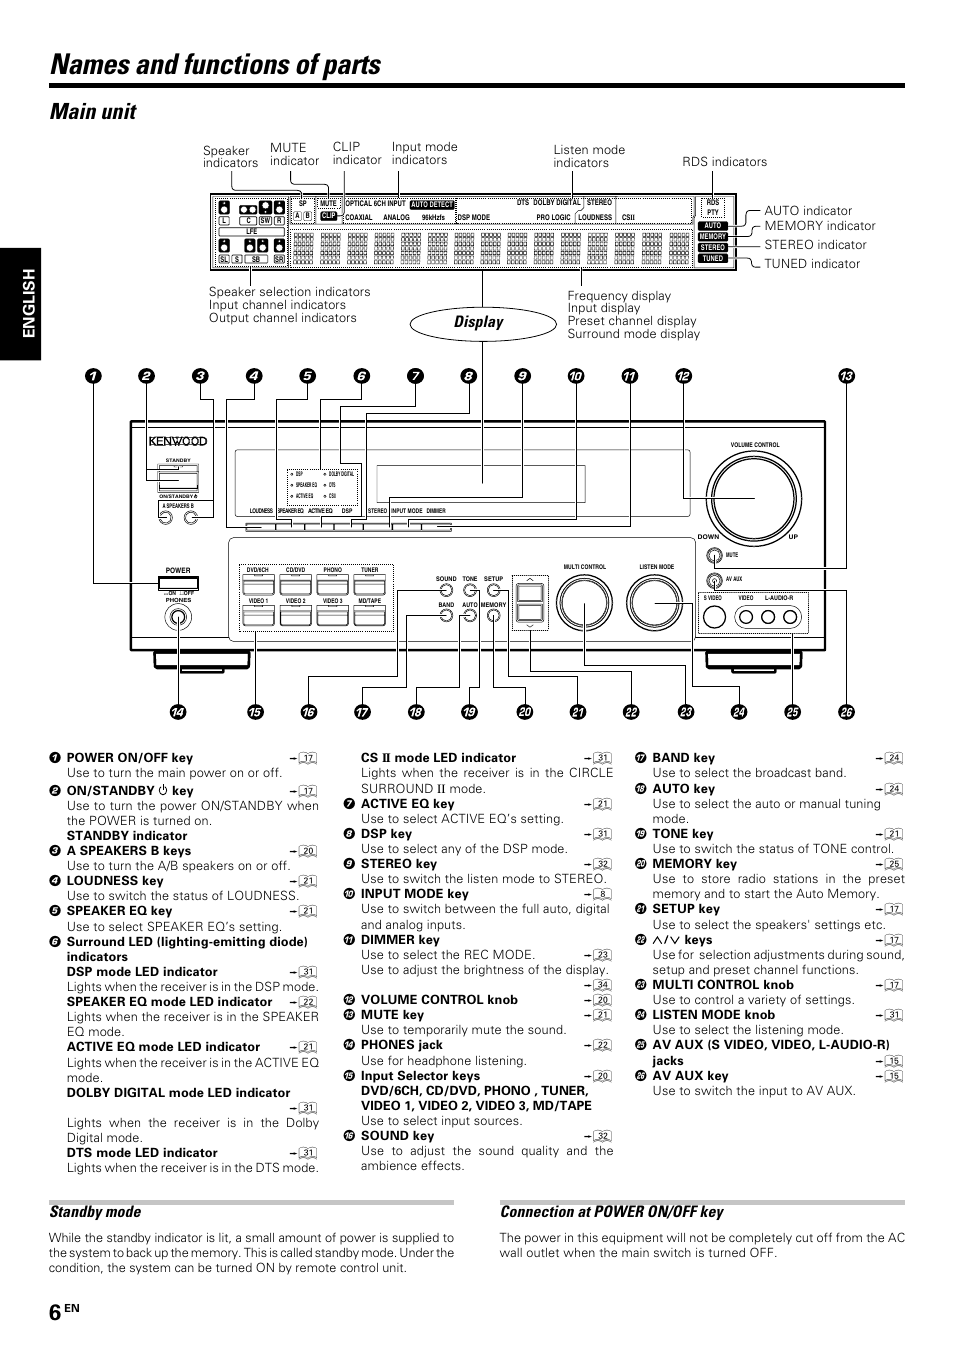 Names and functions of parts, Main unit, Standby mode | Kenwood KRF-V7070D  User Manual | Page 6 / 48